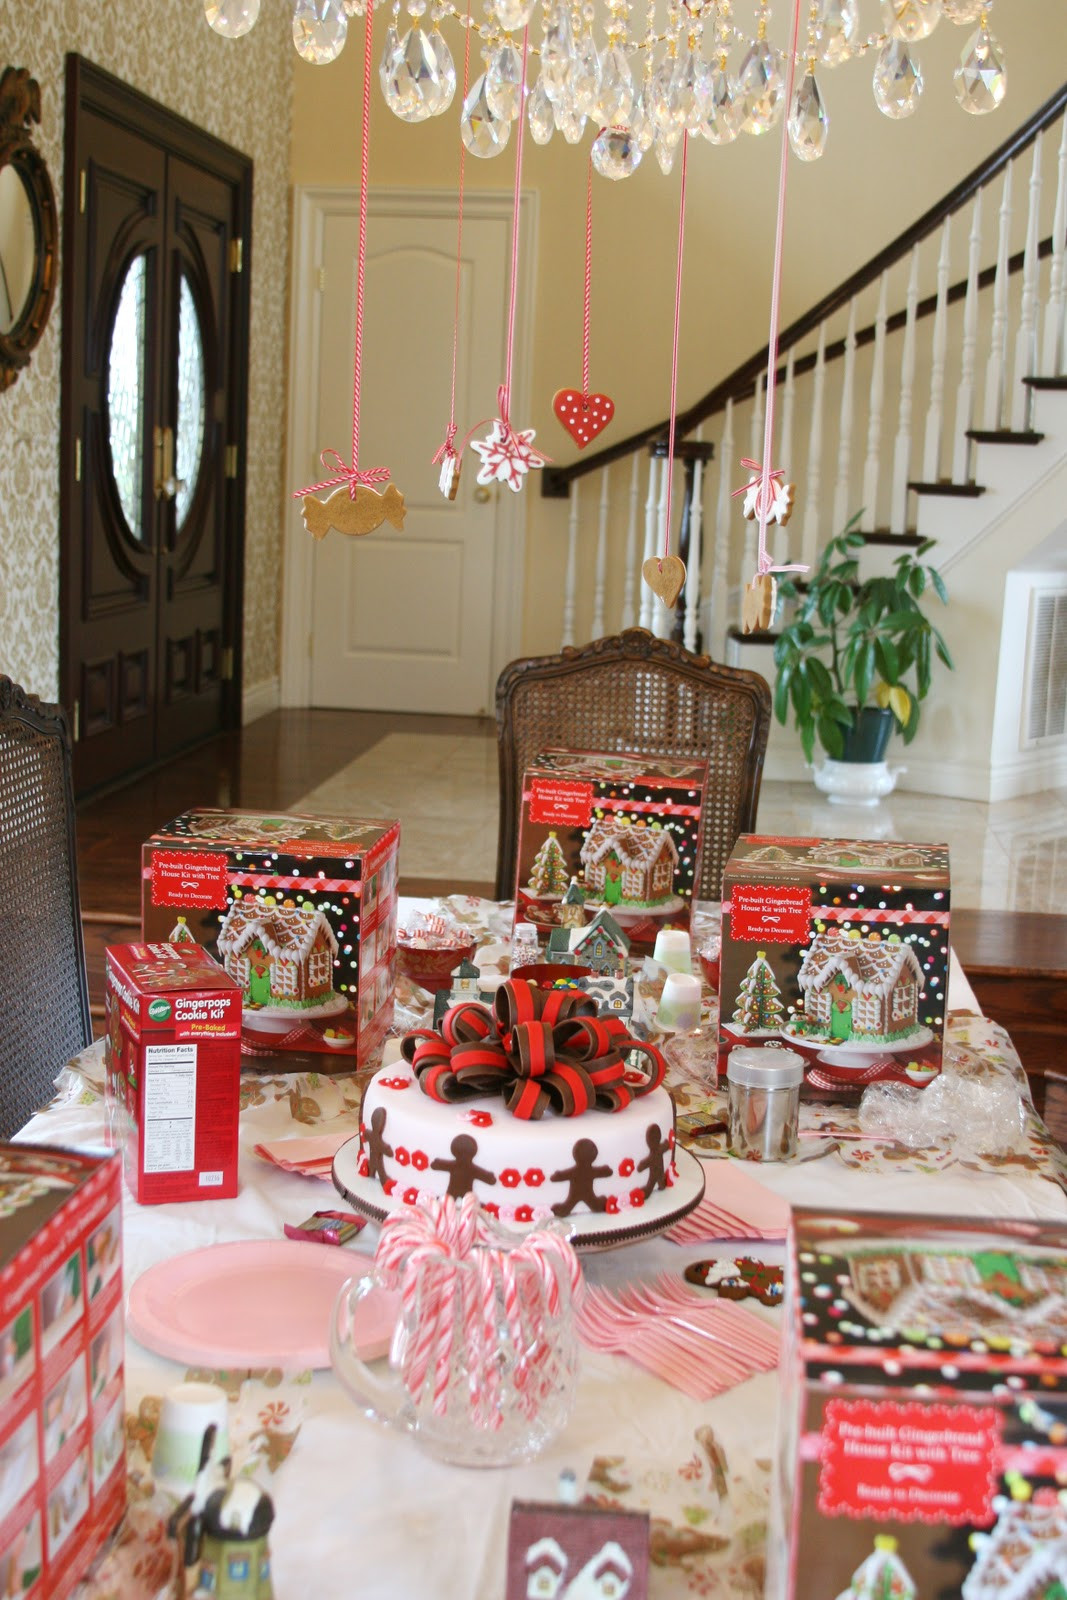 House Christmas Party Ideas
 Sweet Parties A Gingerbread Party – Glorious Treats